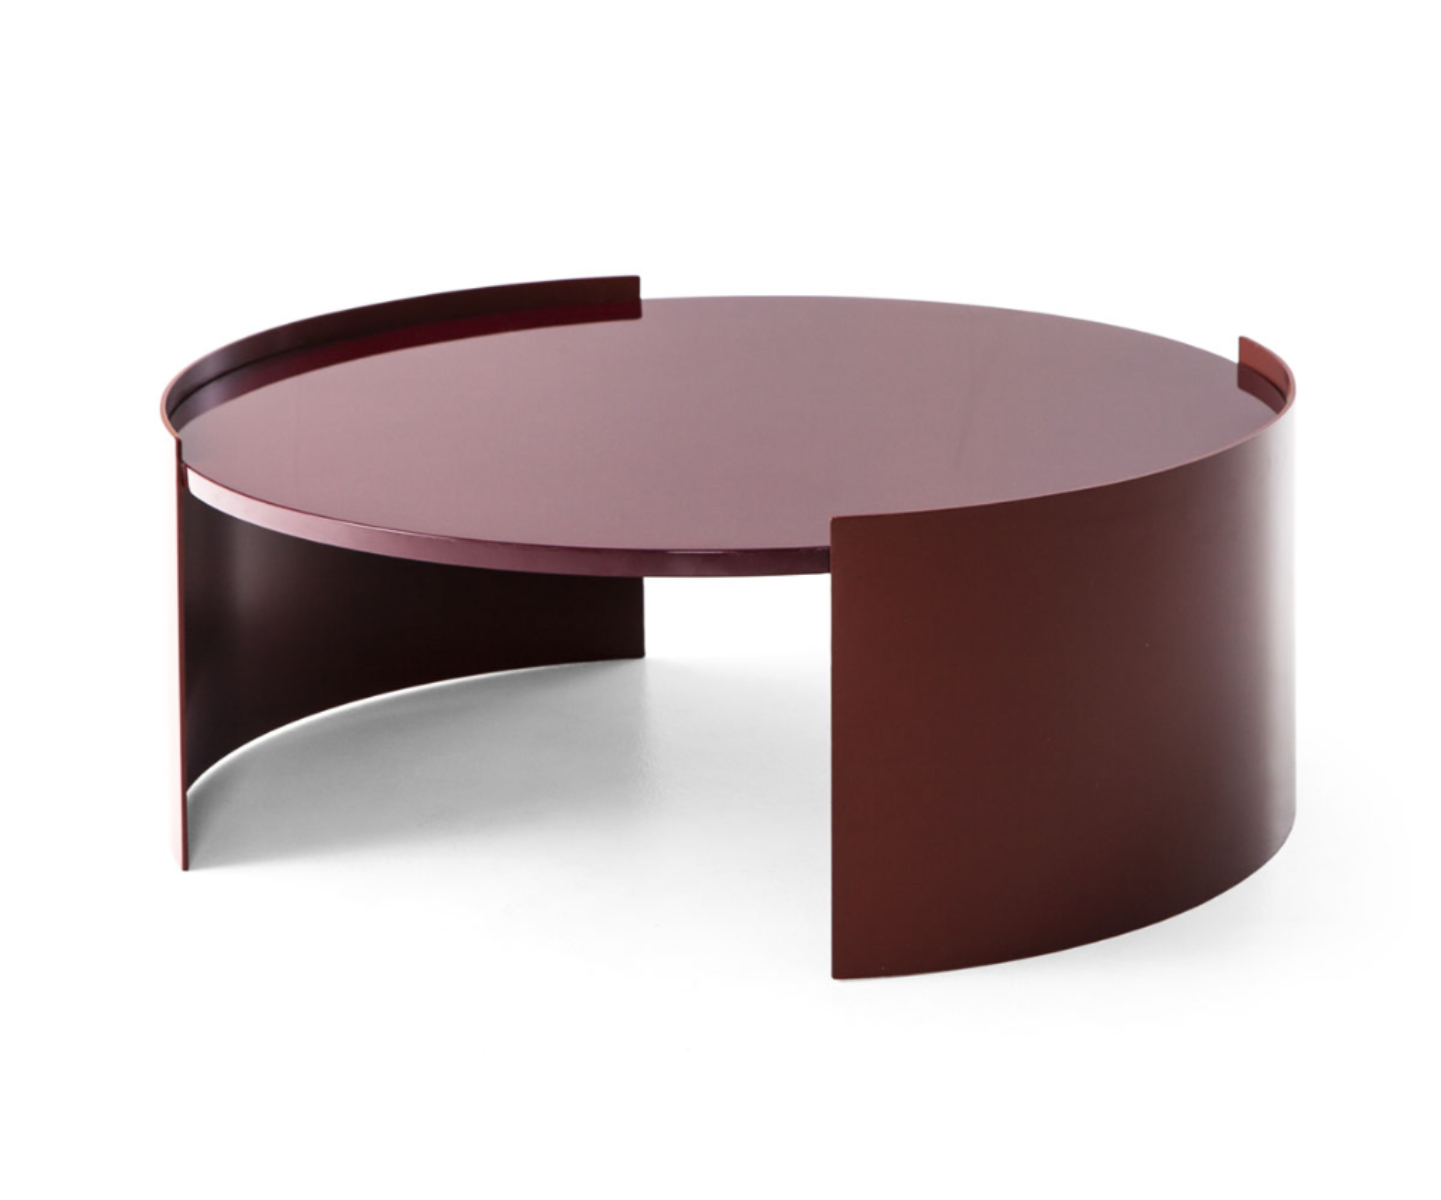 Bowy Coffee Table